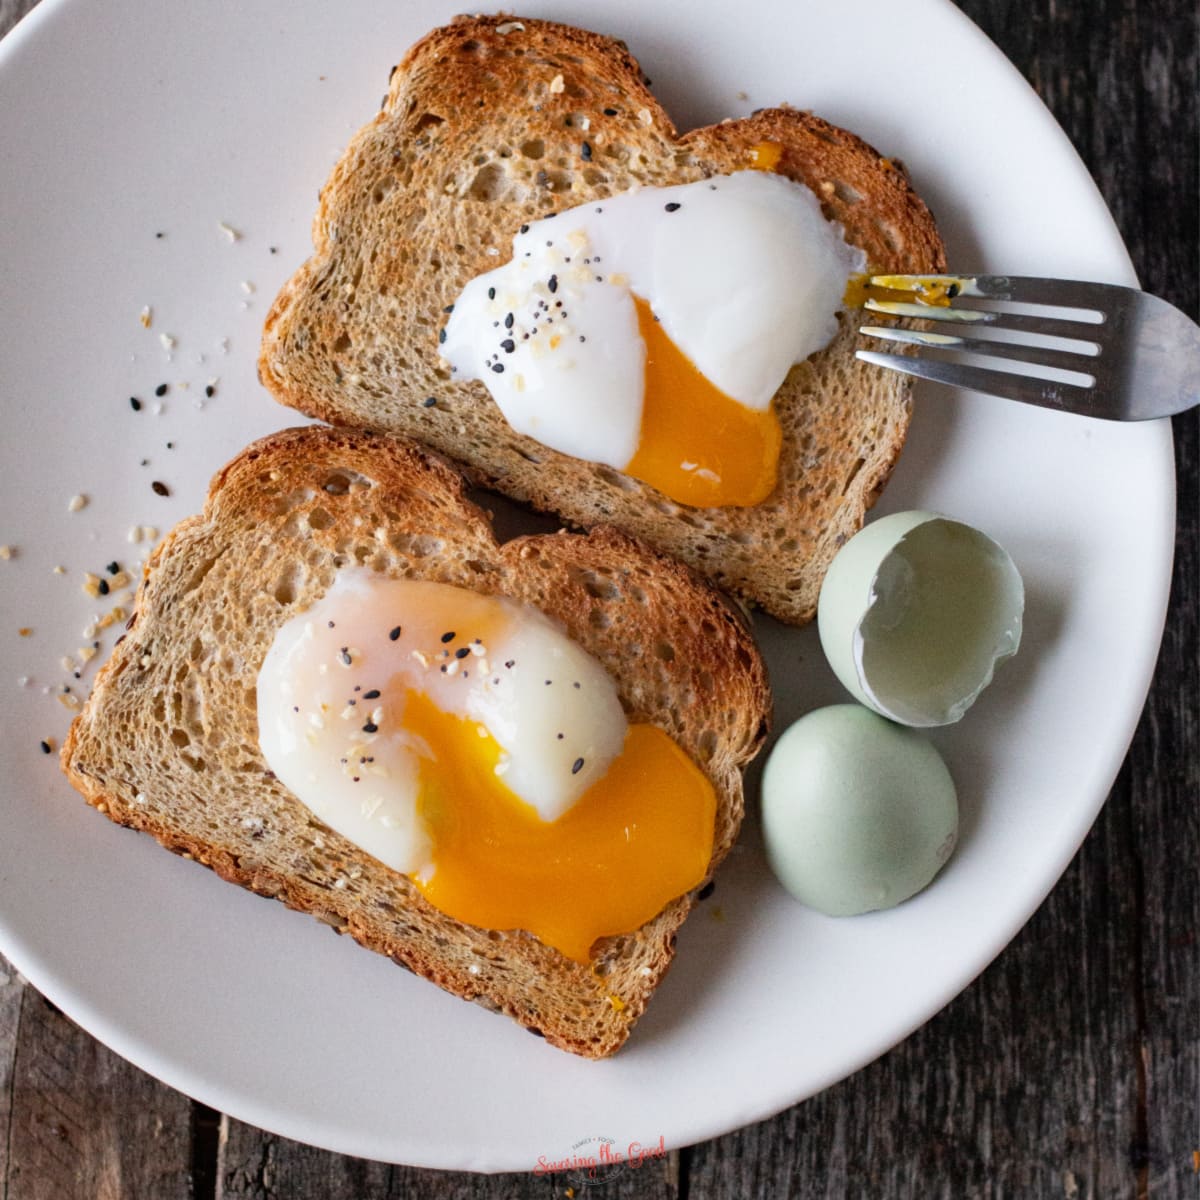 Perfect Sous Vide Poached Eggs | Savoring The Good®